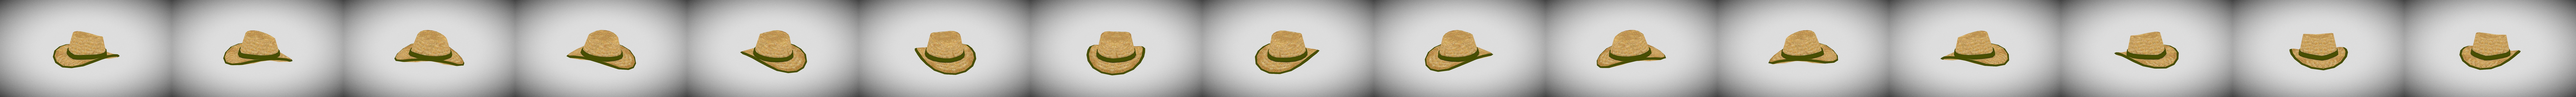 Straw Hat For Roblox Game Buy Royalty Free 3d Model By Catafest Catafest 14ccdf3 - roblox vr hat